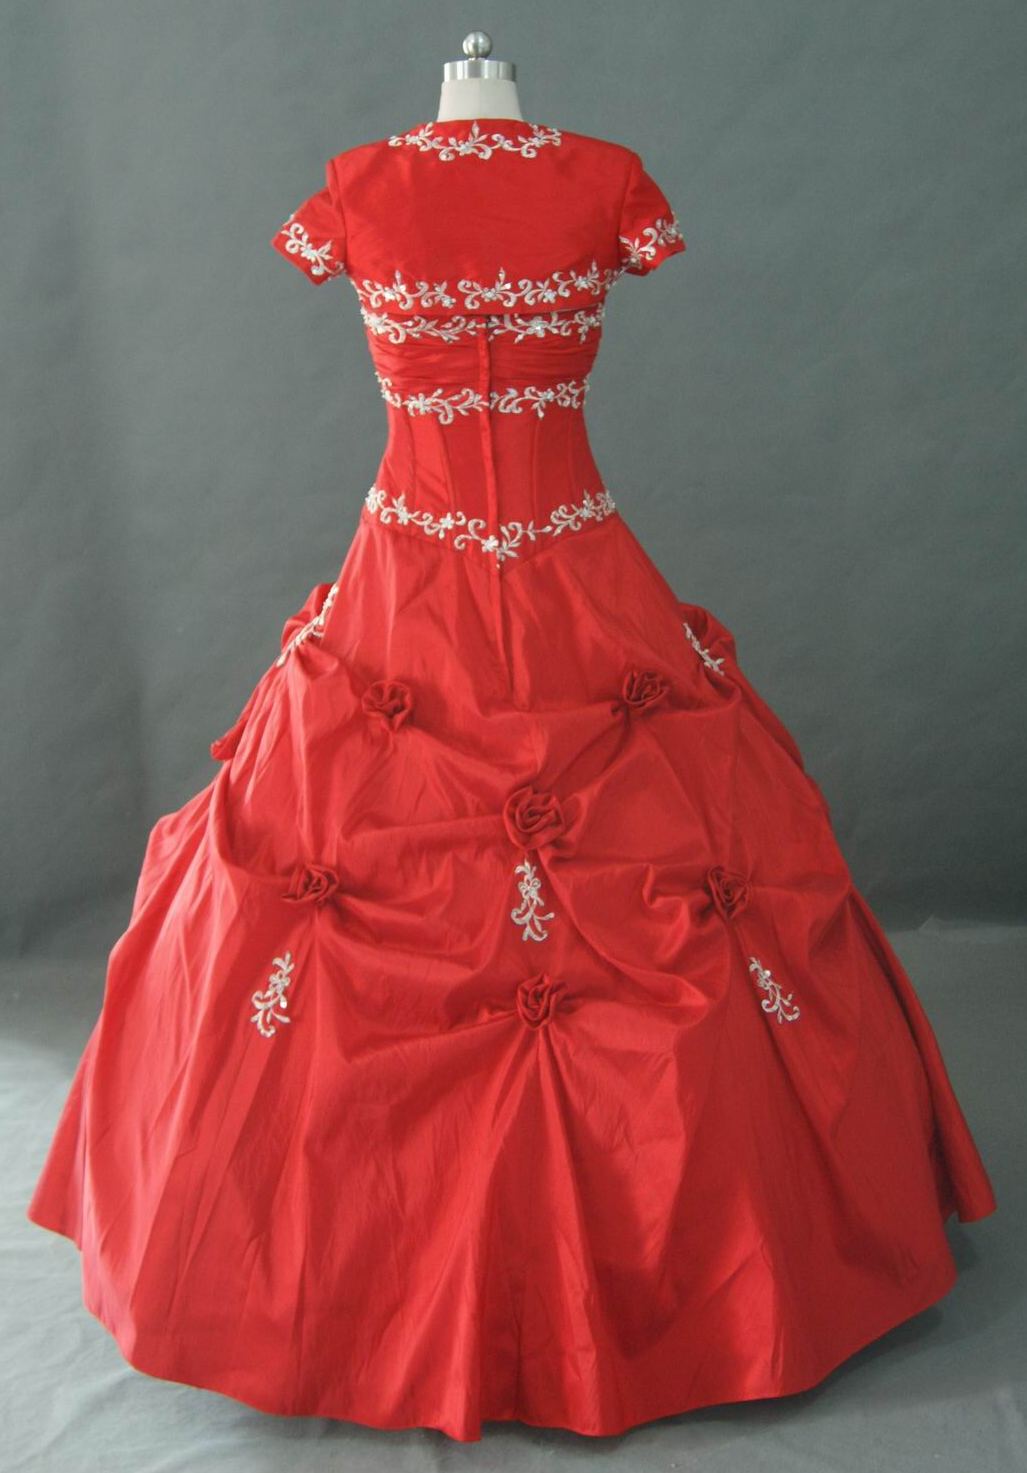 Red drop waist prom dress with flower detail.